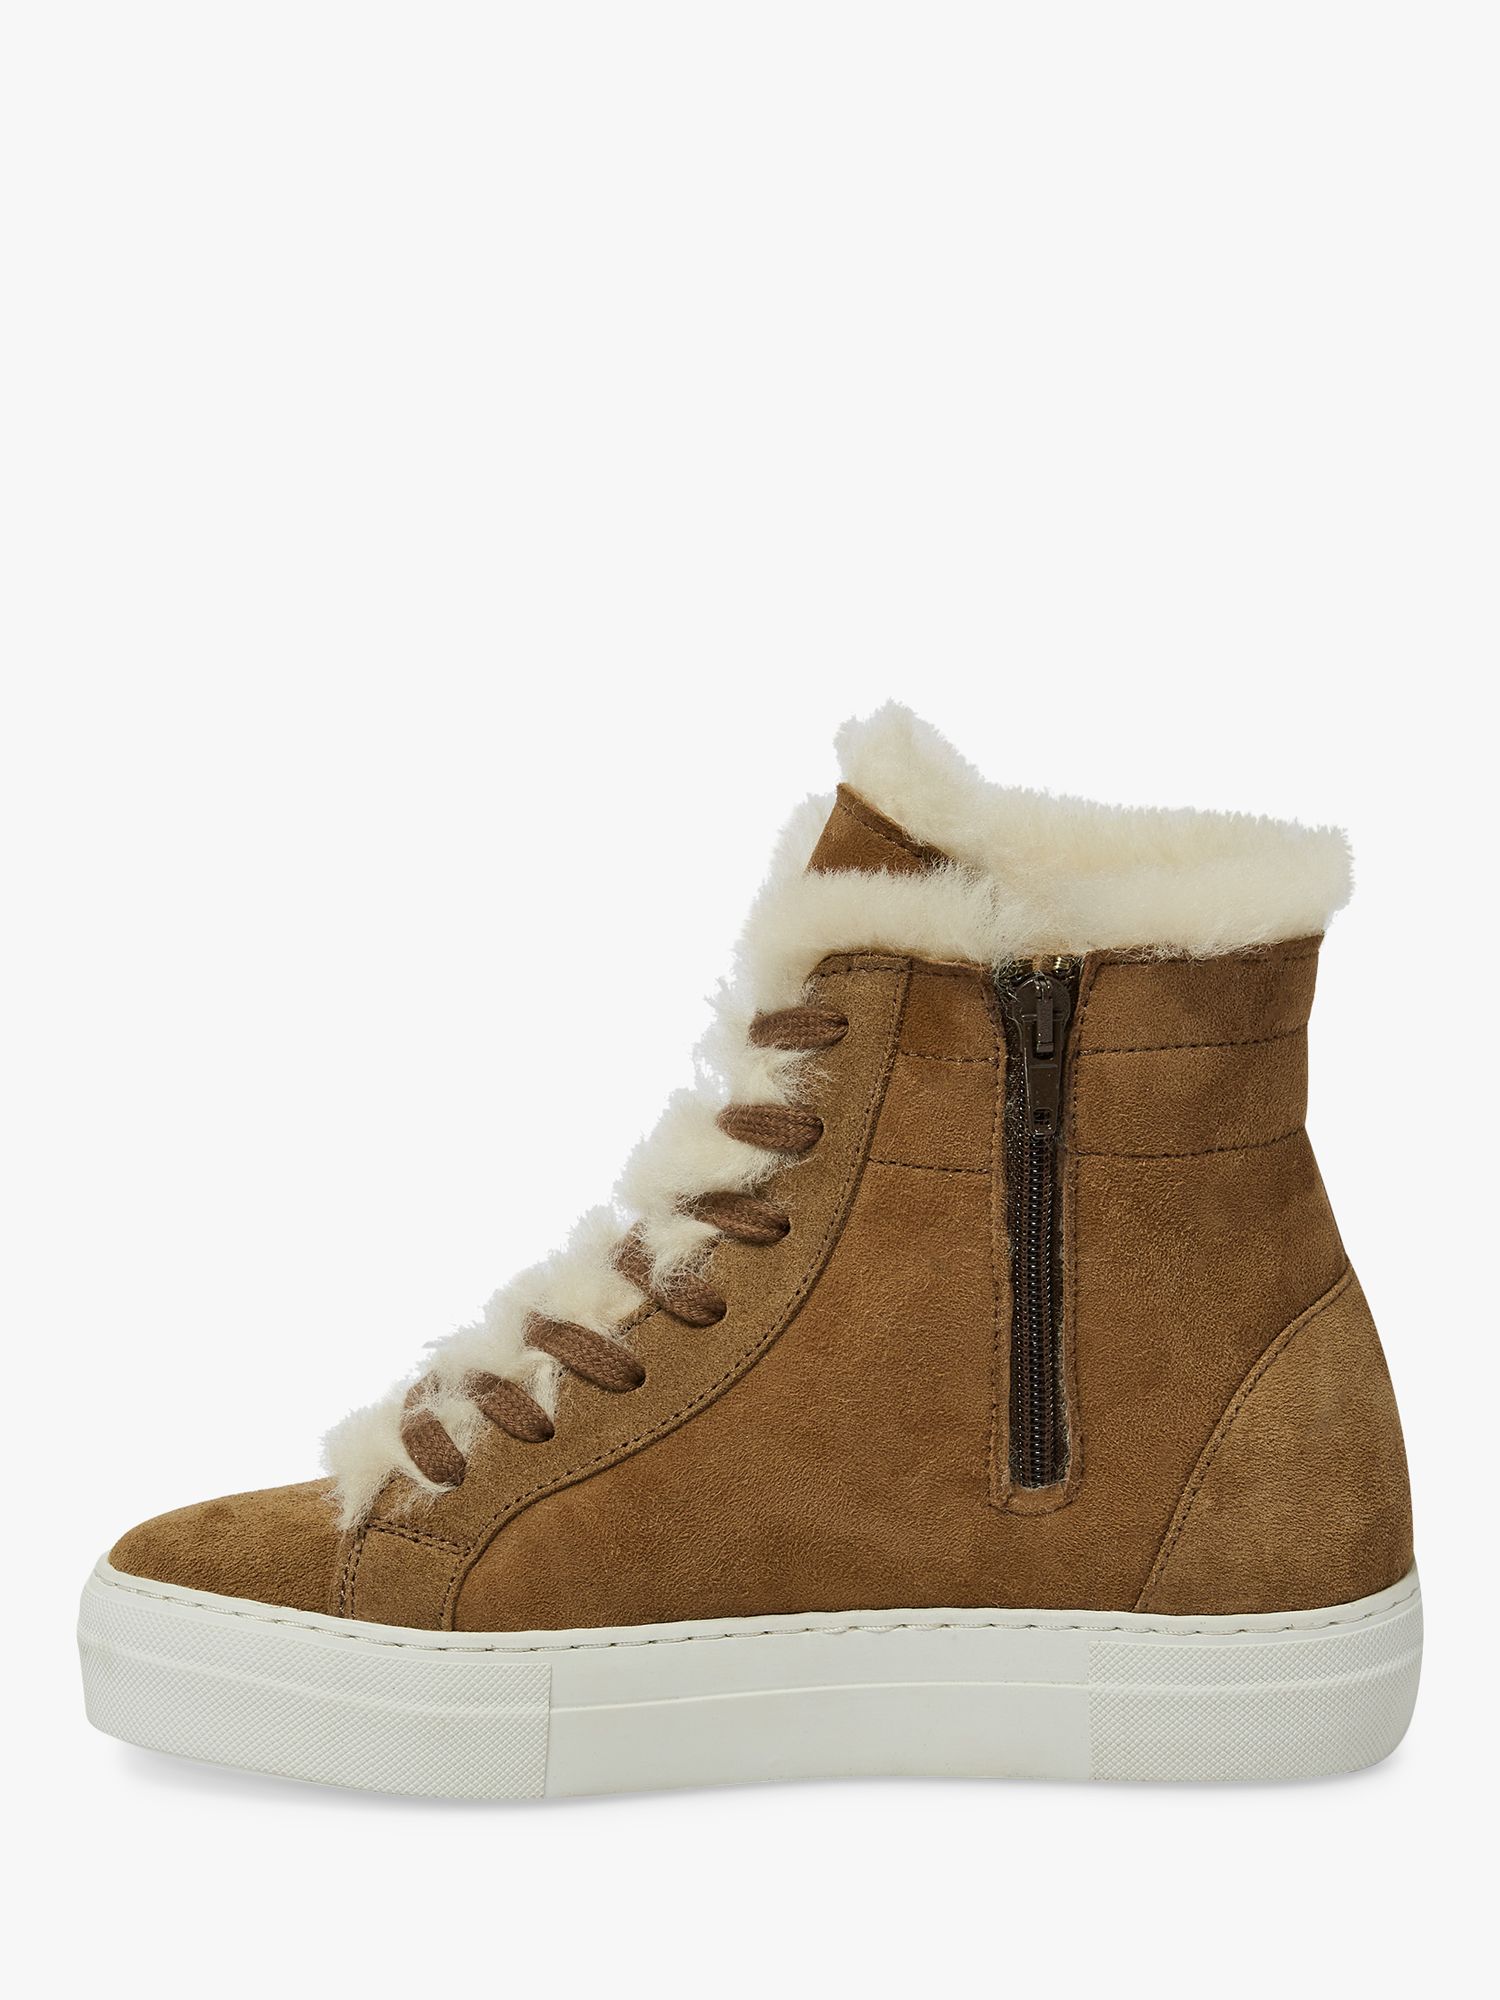 Celtic & Co. Sheepskin High Top Trainers, Whisky, 3